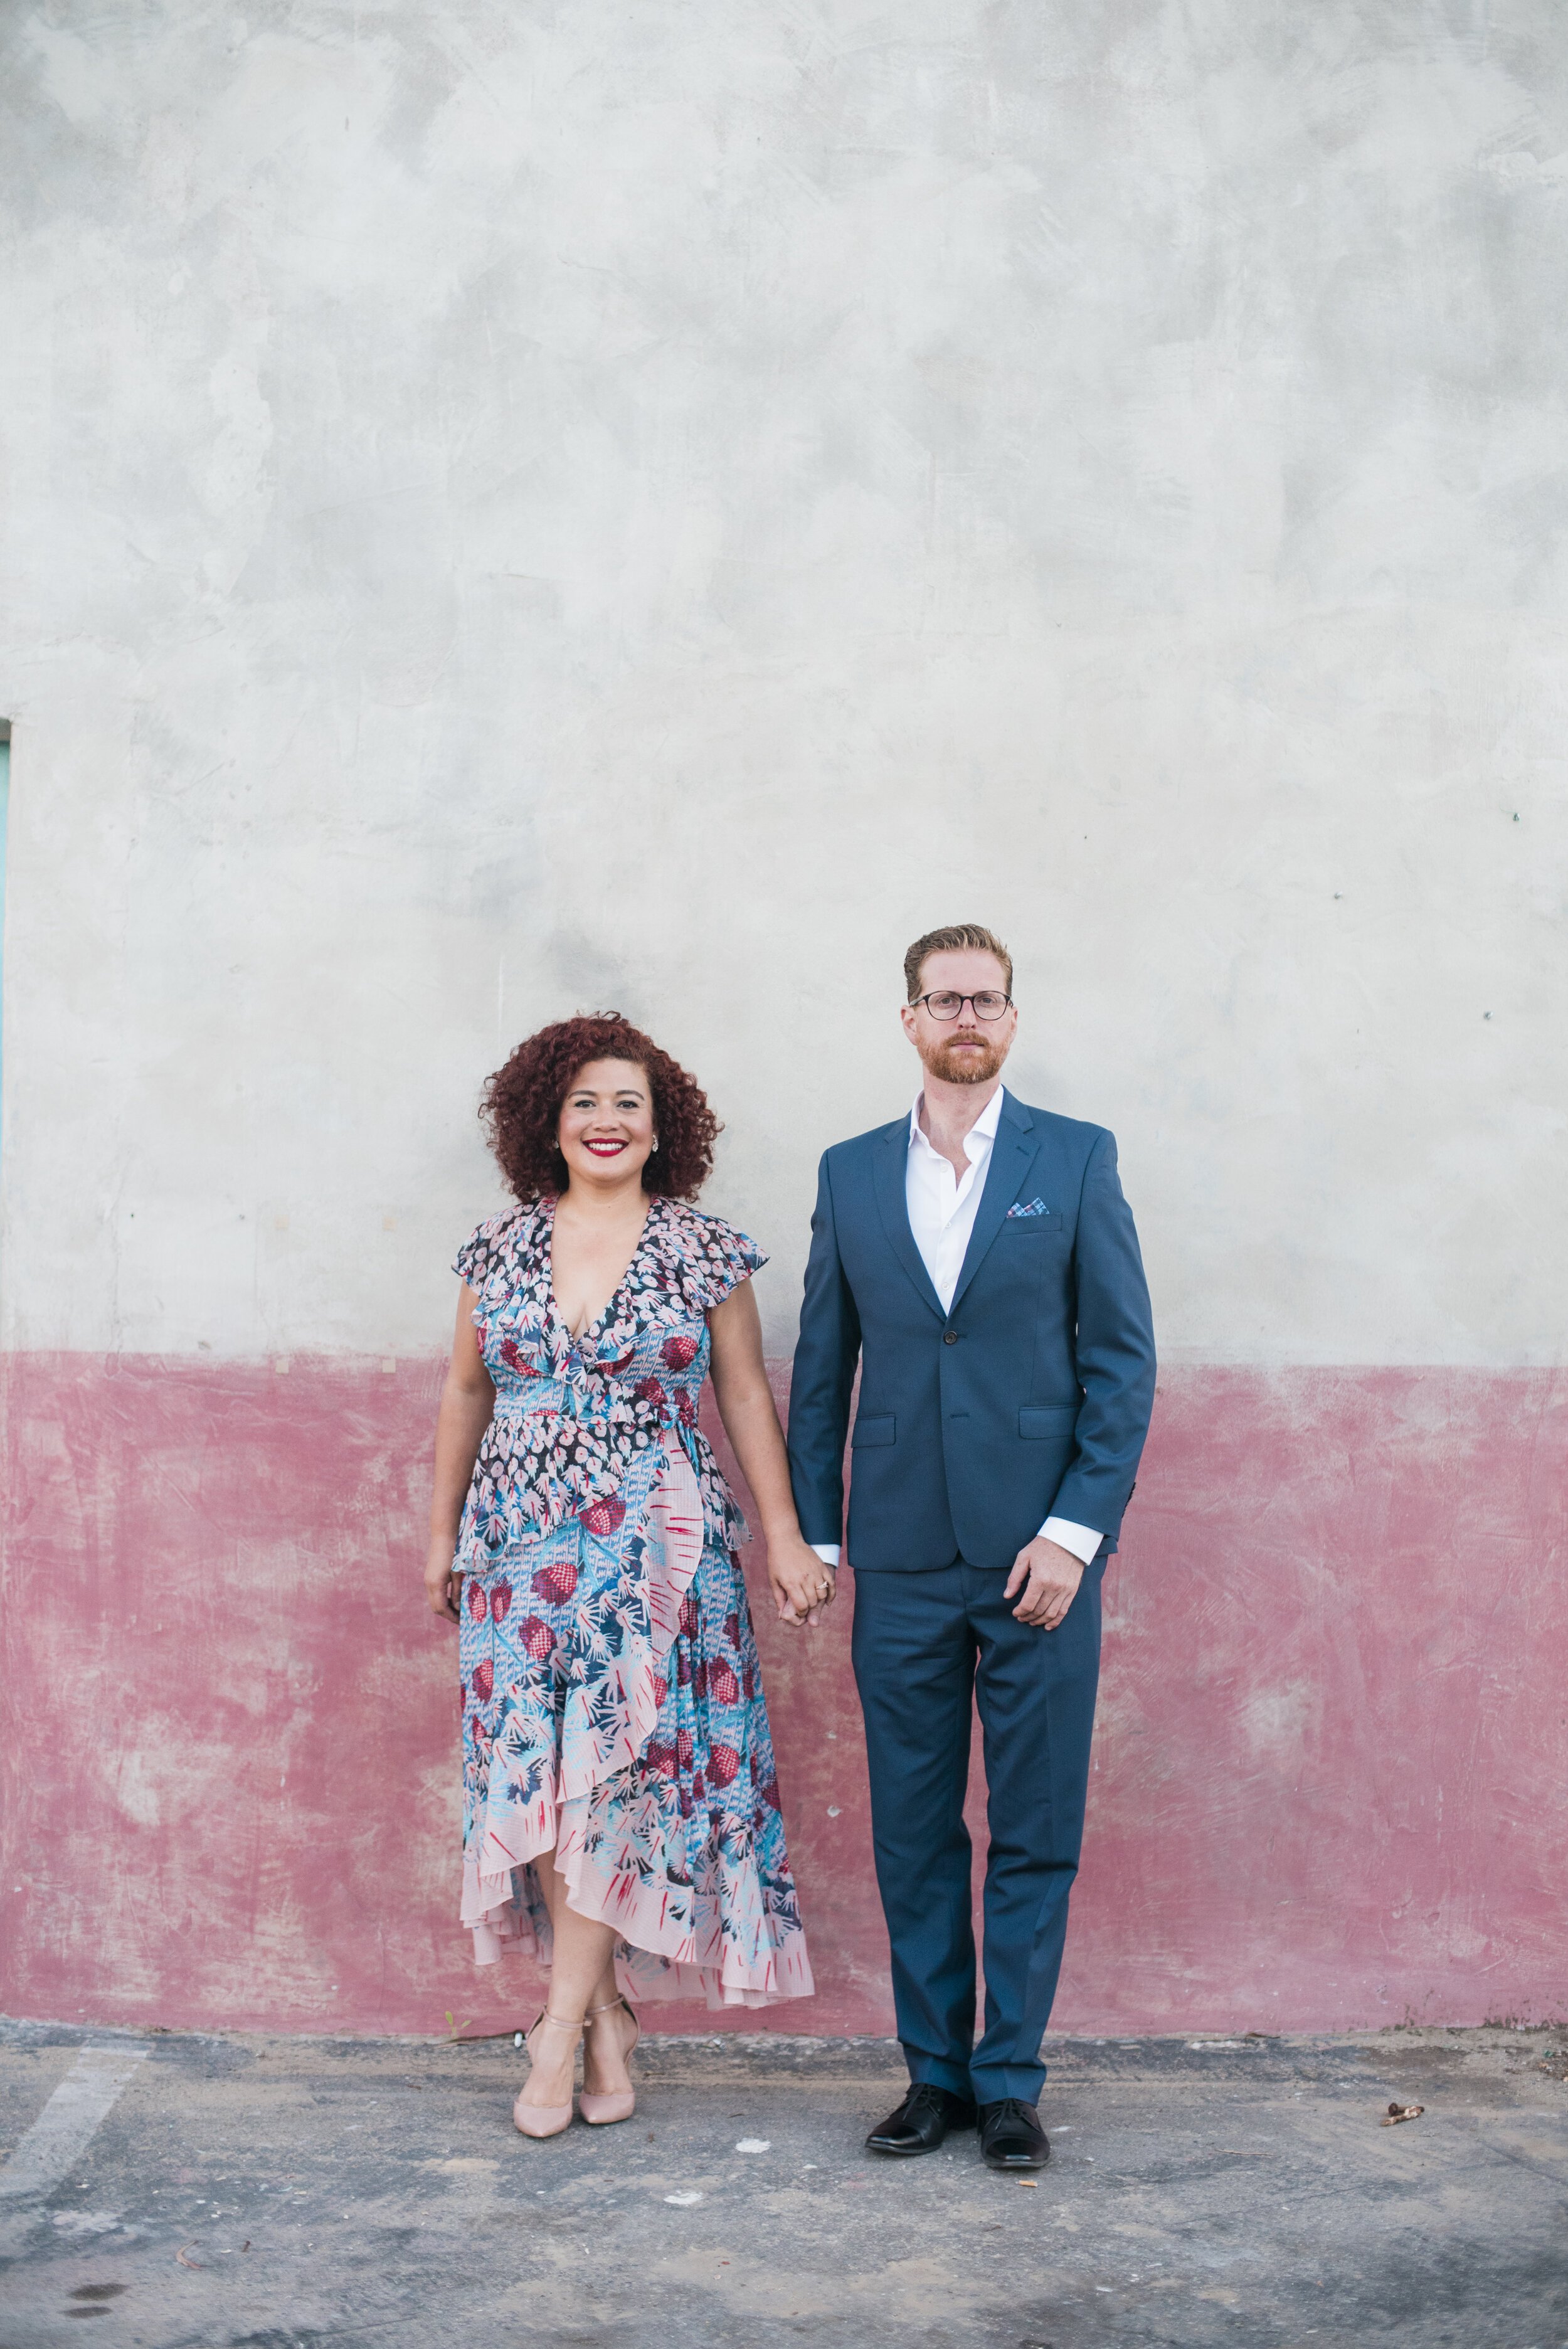 www.santabarbarawedding.com | ByCherry Photography | The Funk Zone | The Couple in Front of a Tan and Red Wall